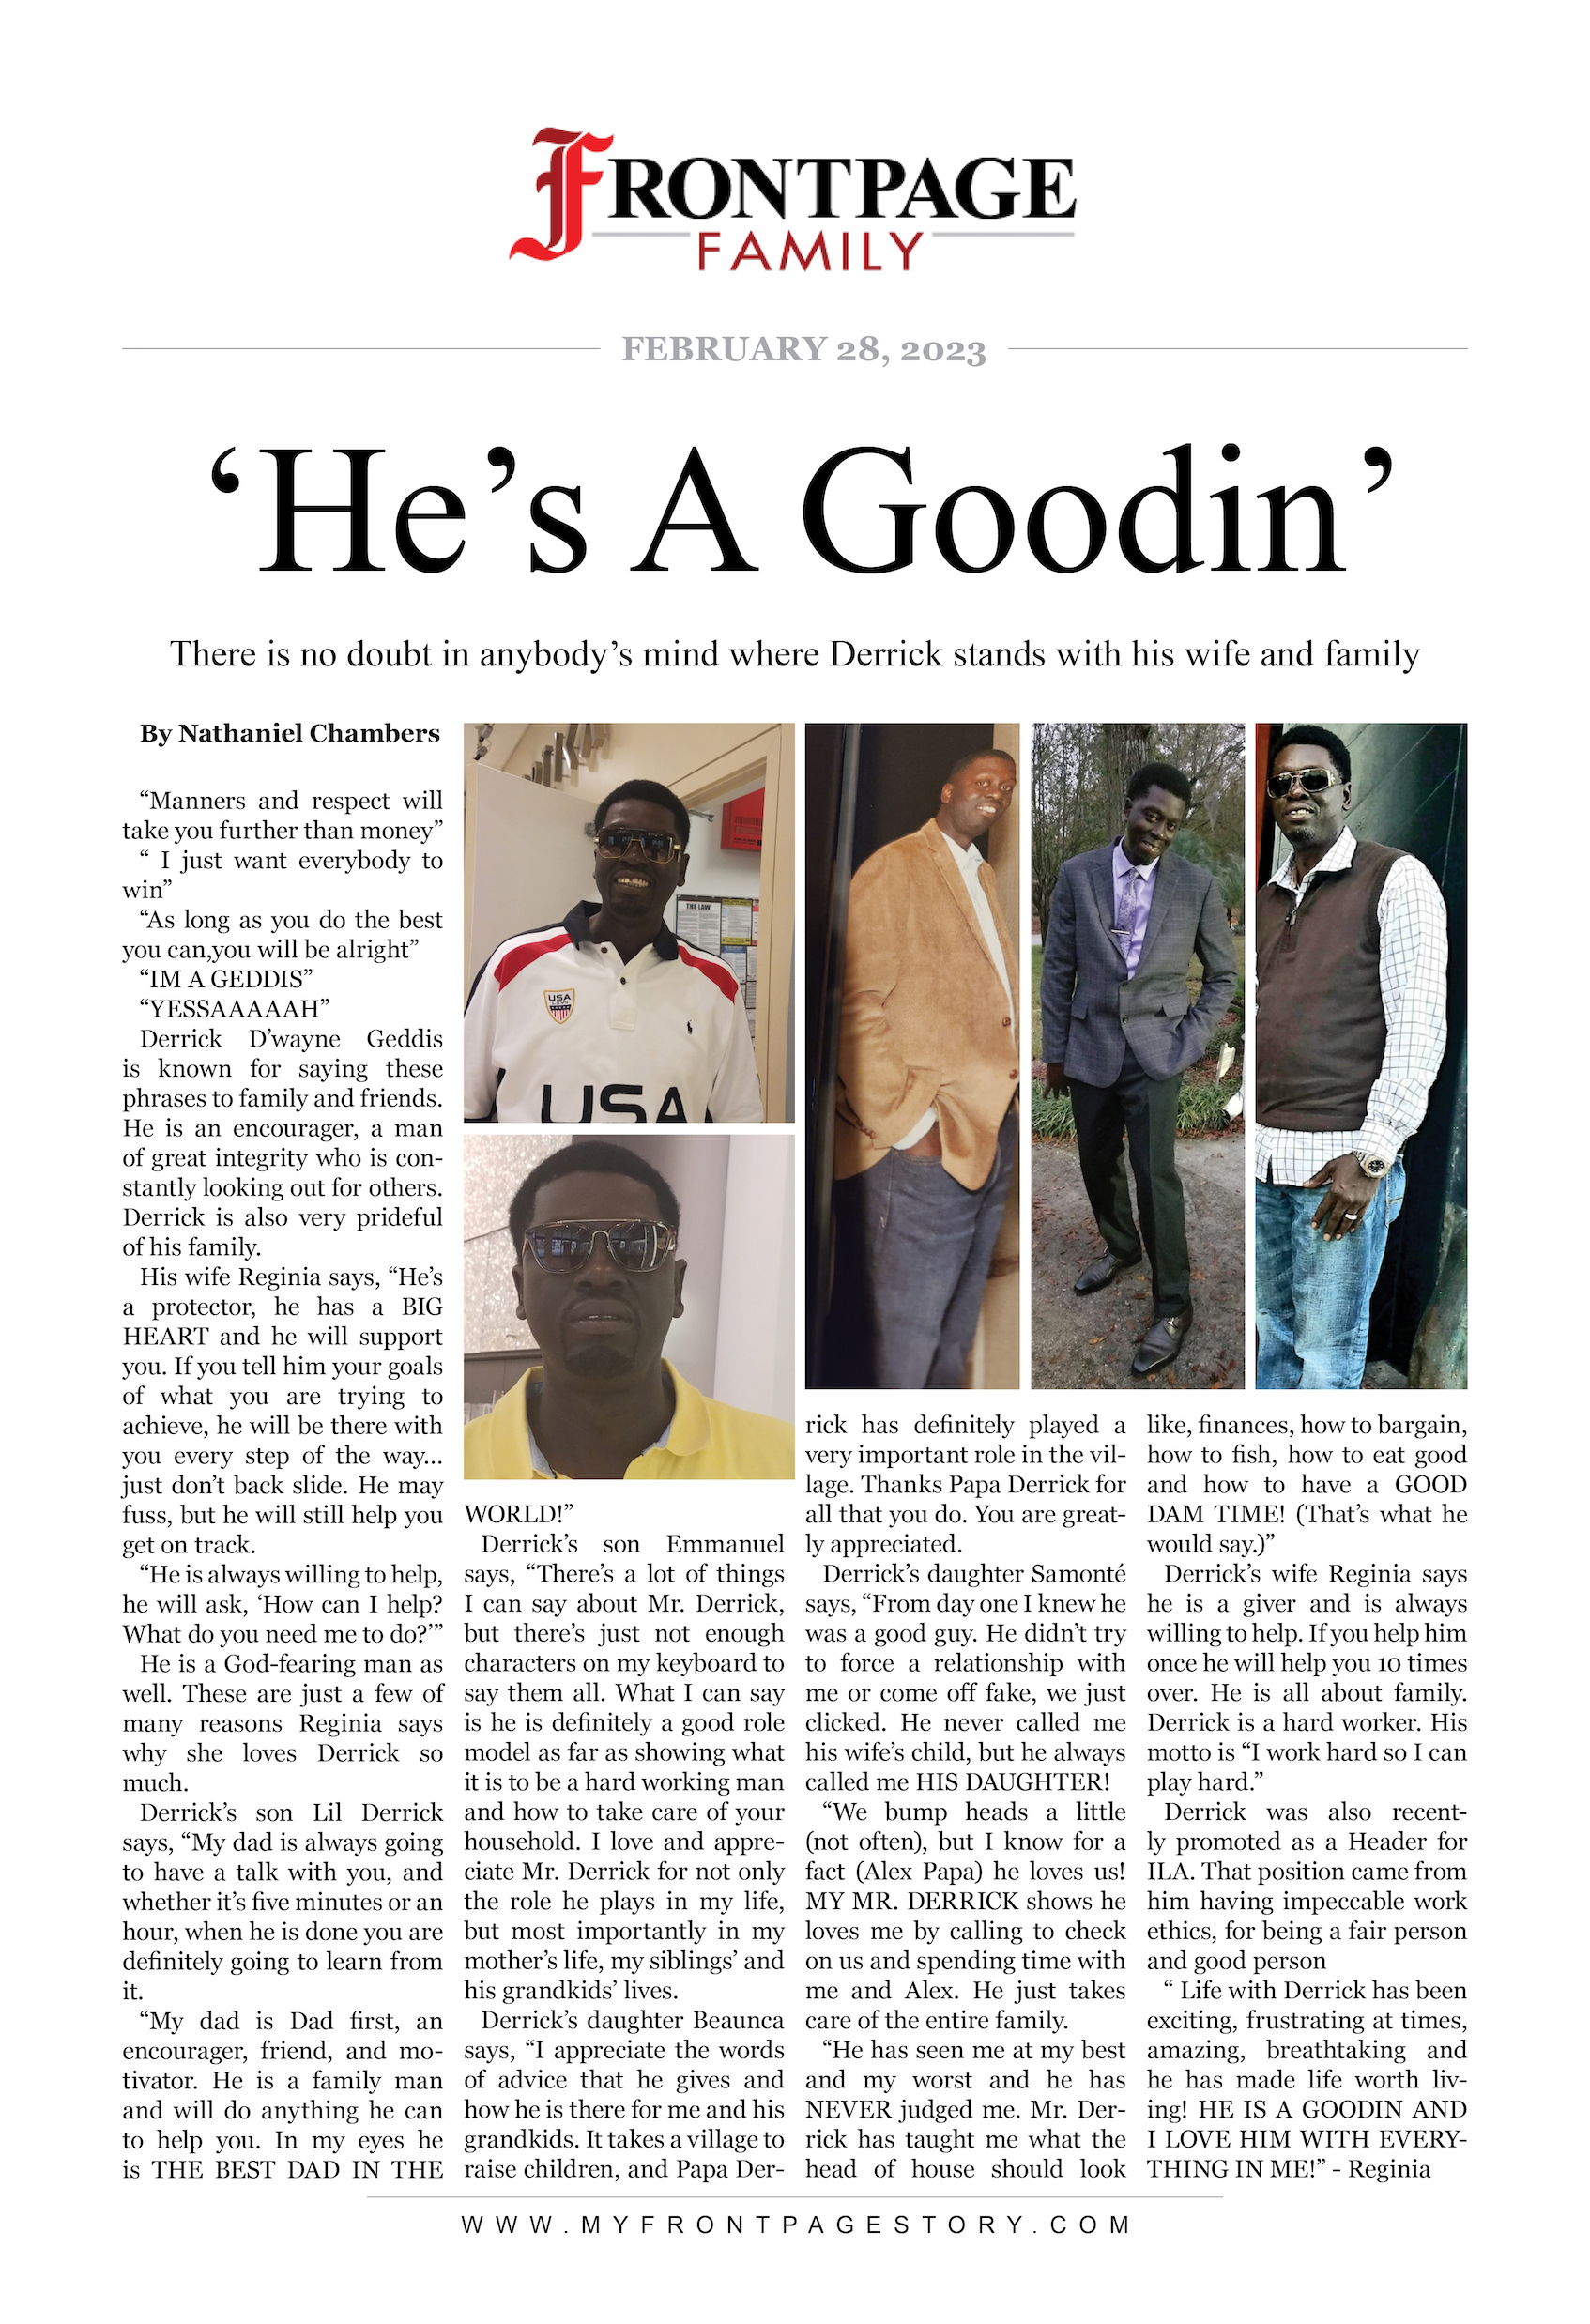 personalized newspaper gift for Derrick Geddis titled ‘He’s A Goodin’